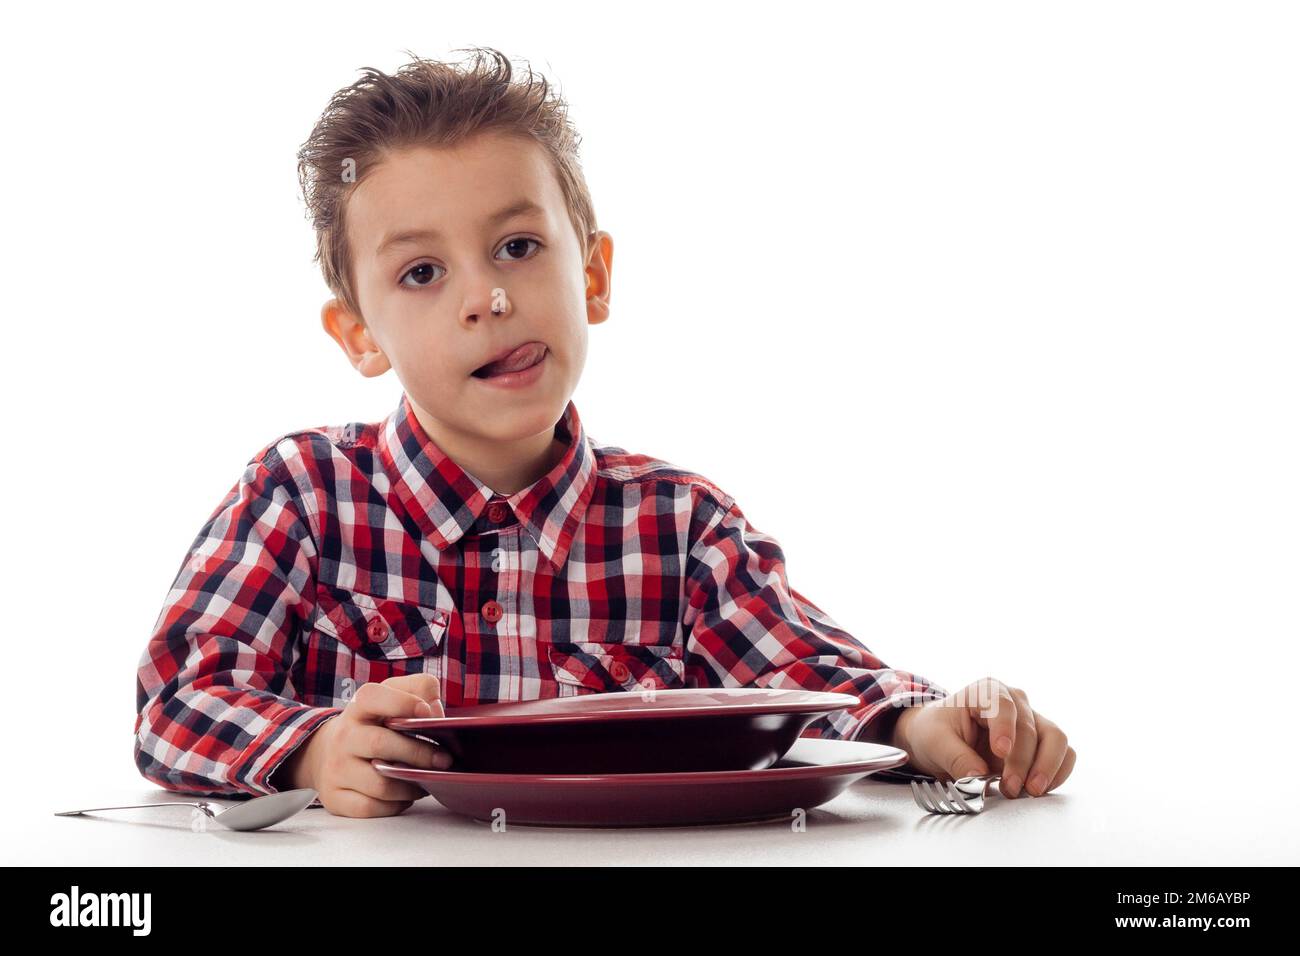 Boy licking mouth befor food Stock Photo